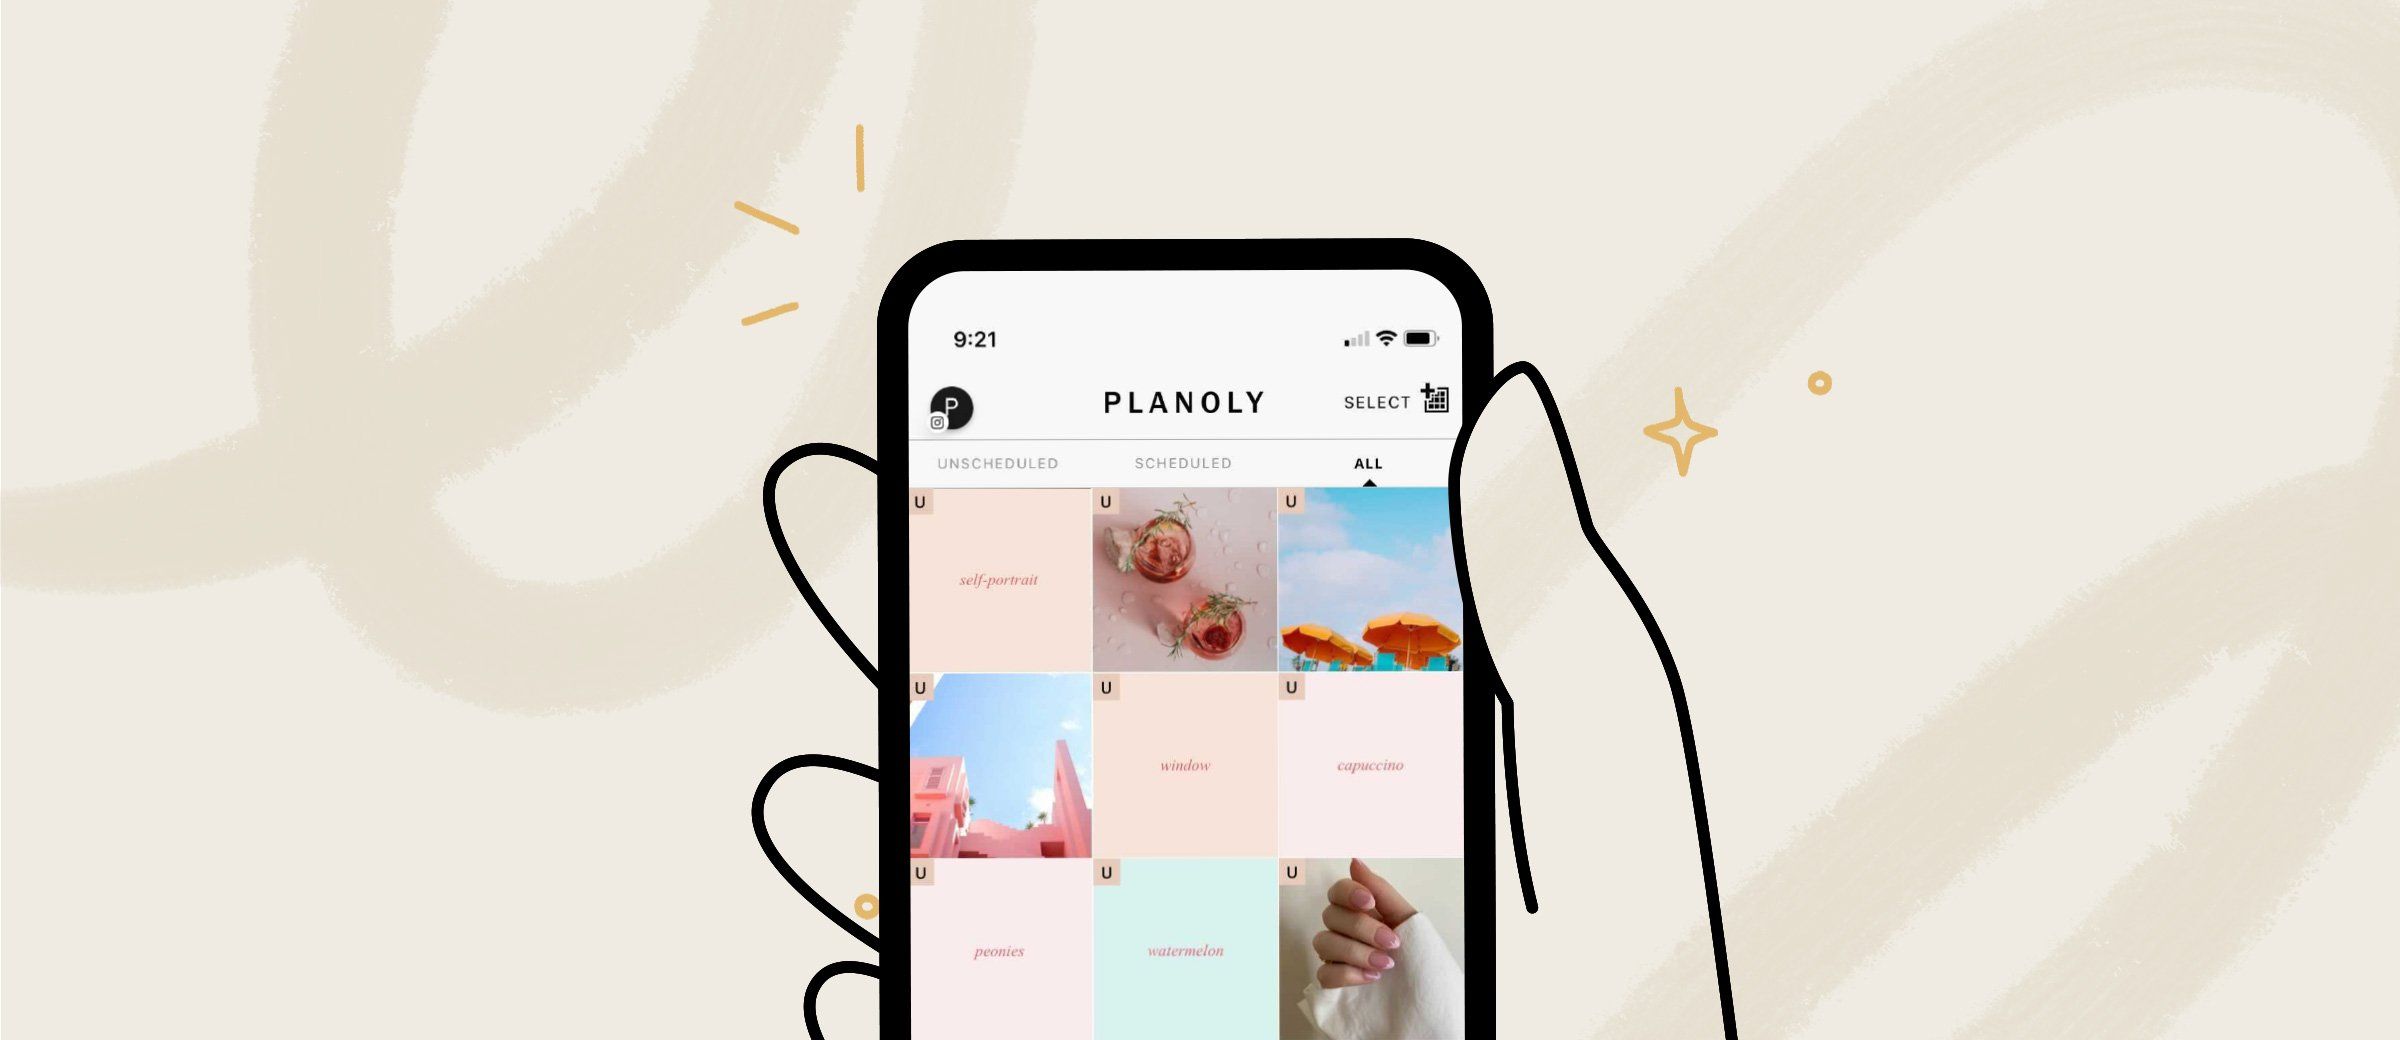 How to Use PLANOLY's Placeholder Feature